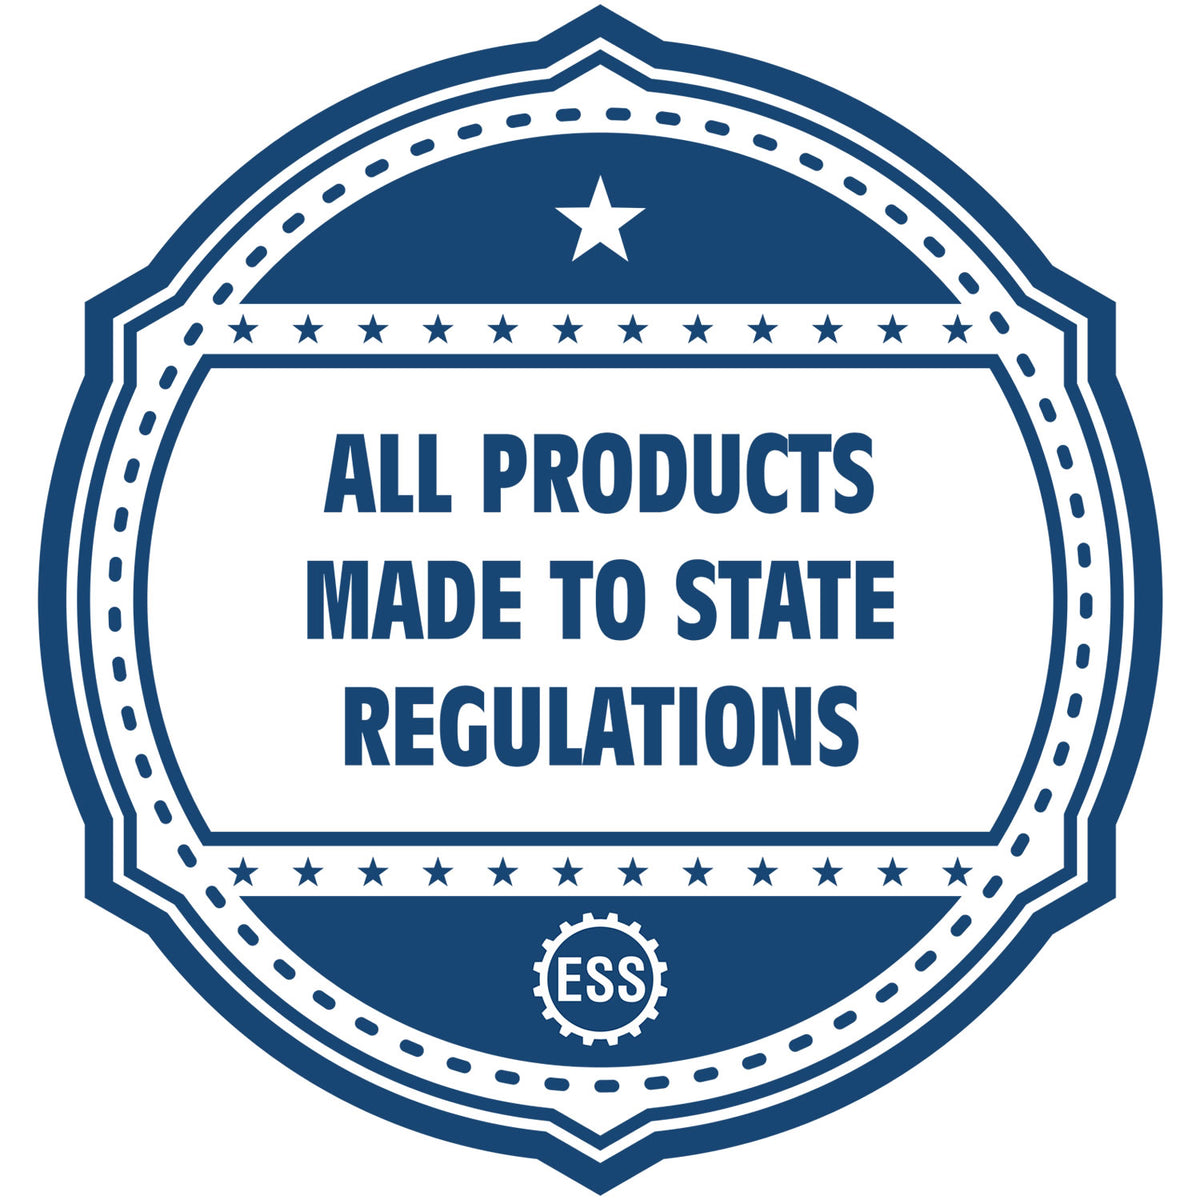 A blue icon or badge for the Slim Pre-Inked Nevada Professional Geologist Seal Stamp showing that this product is made in compliance with state regulations.